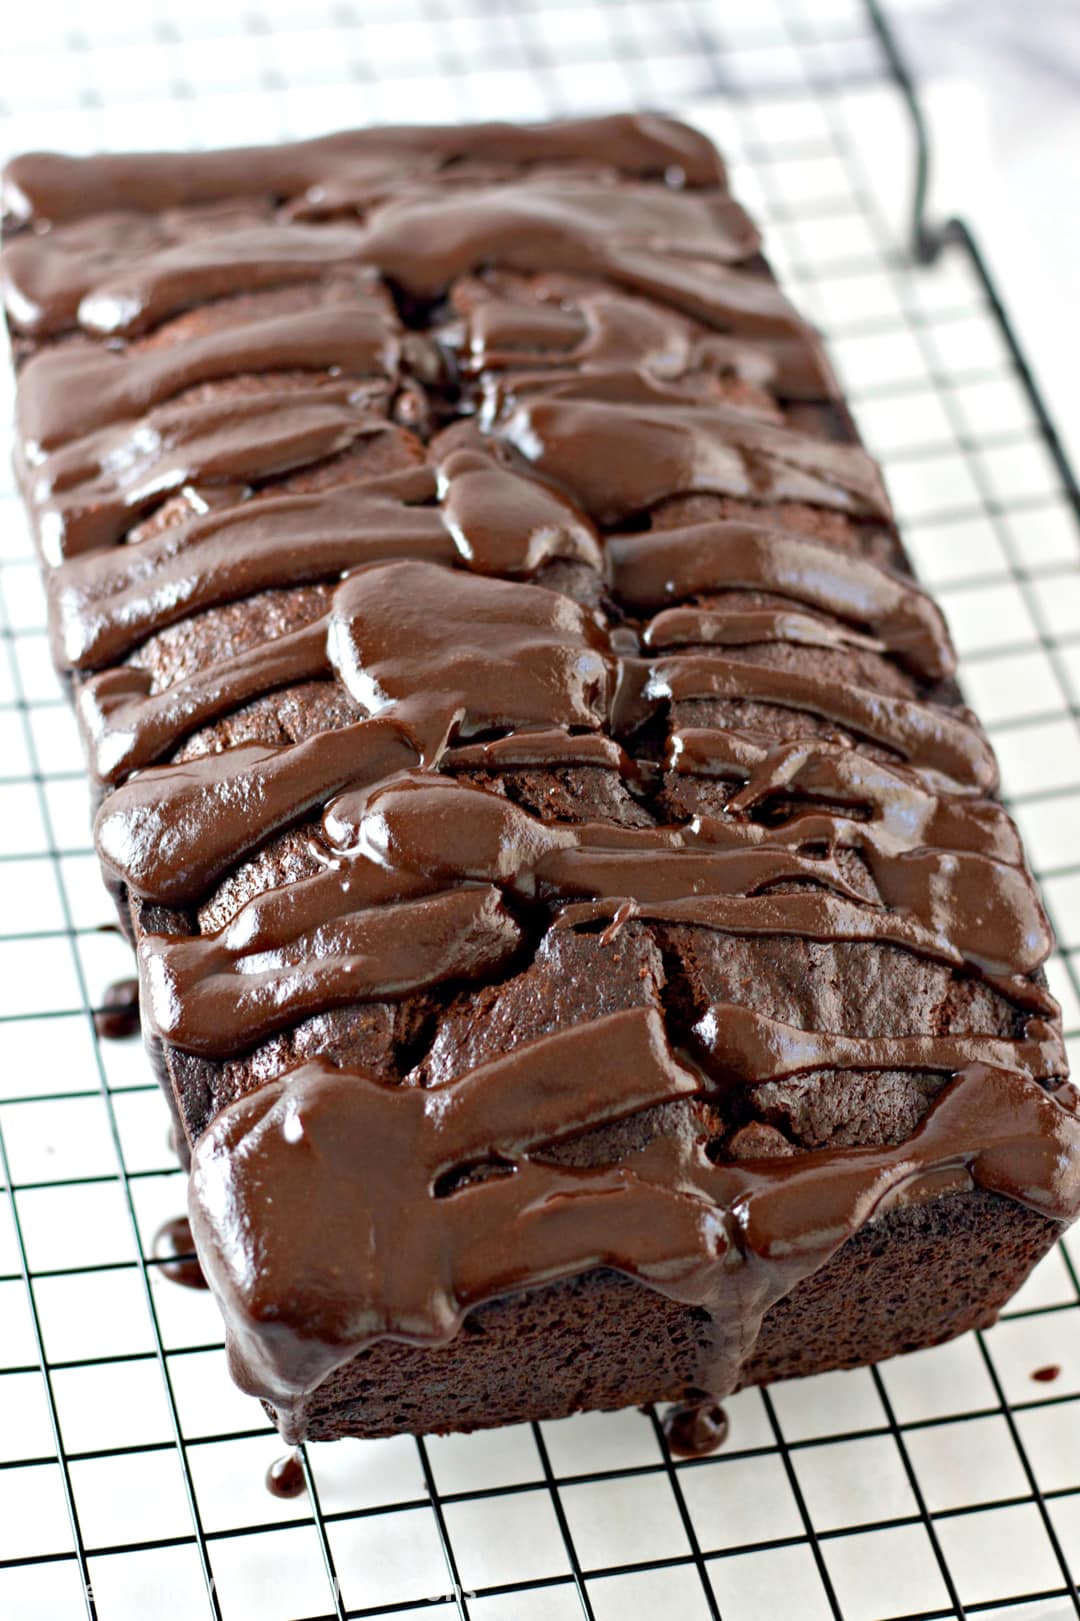 Chocolate Banana Bread on a wire cooling rack